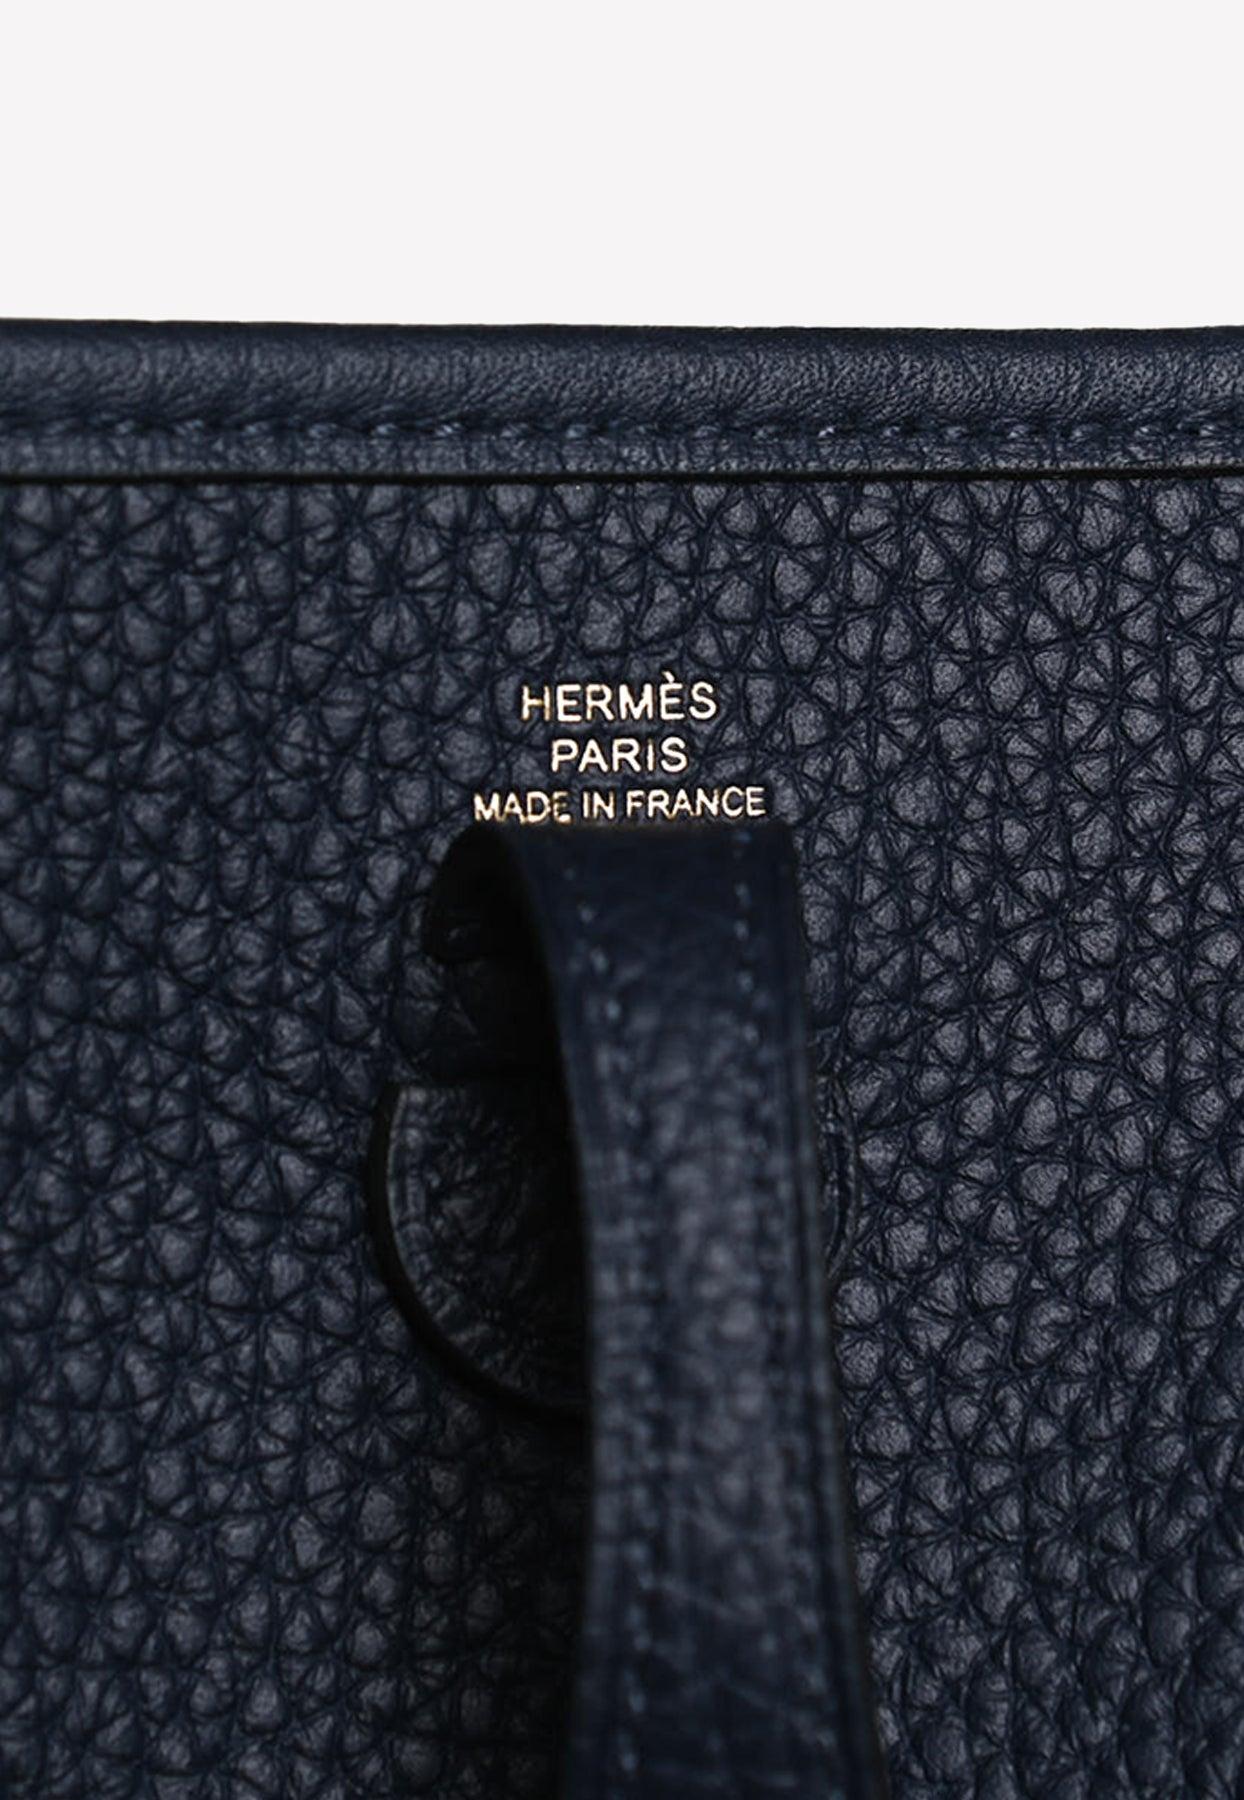 Hermès Mini Evelyn In Bleu Nuit Taurillon Clemence With Gold Hardware in  Black